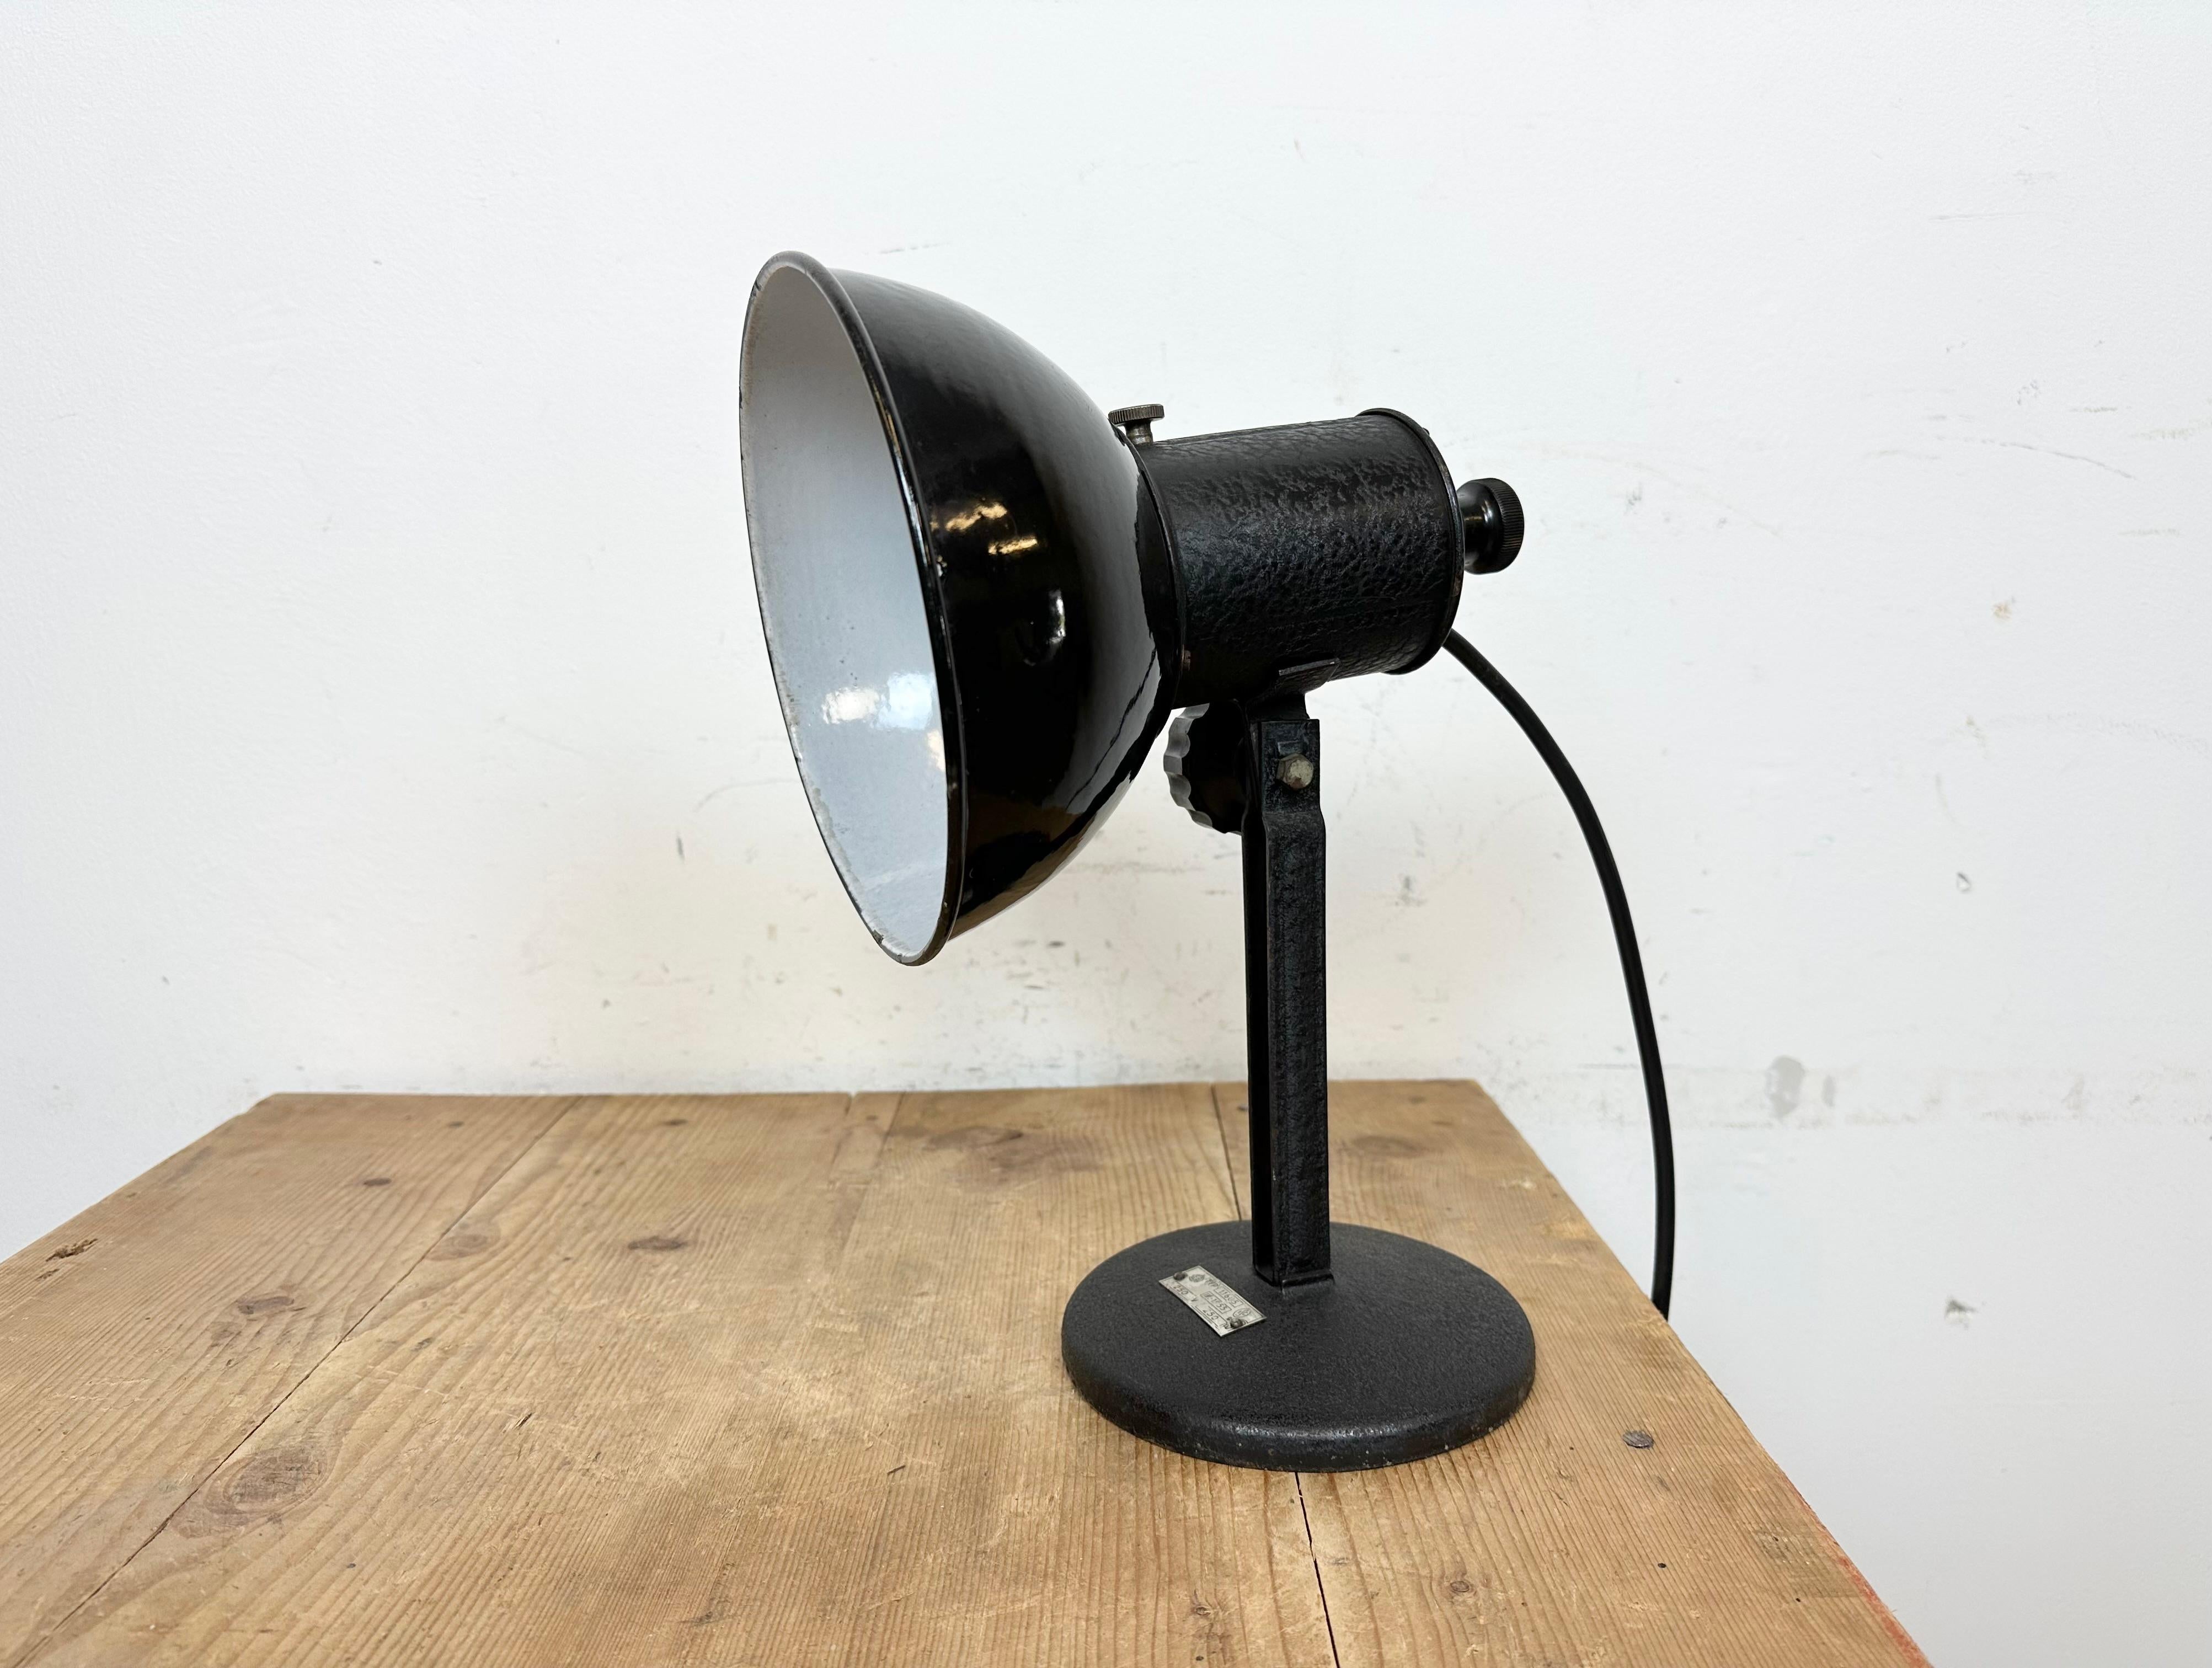 Vintage Industrial adjustable table lamp from former Czechoslovakia made during the 1950s. Was used in photo studios. It features a black enamel shade with white enamel interior an iron arm and base.The original porcelain socket requires standard E